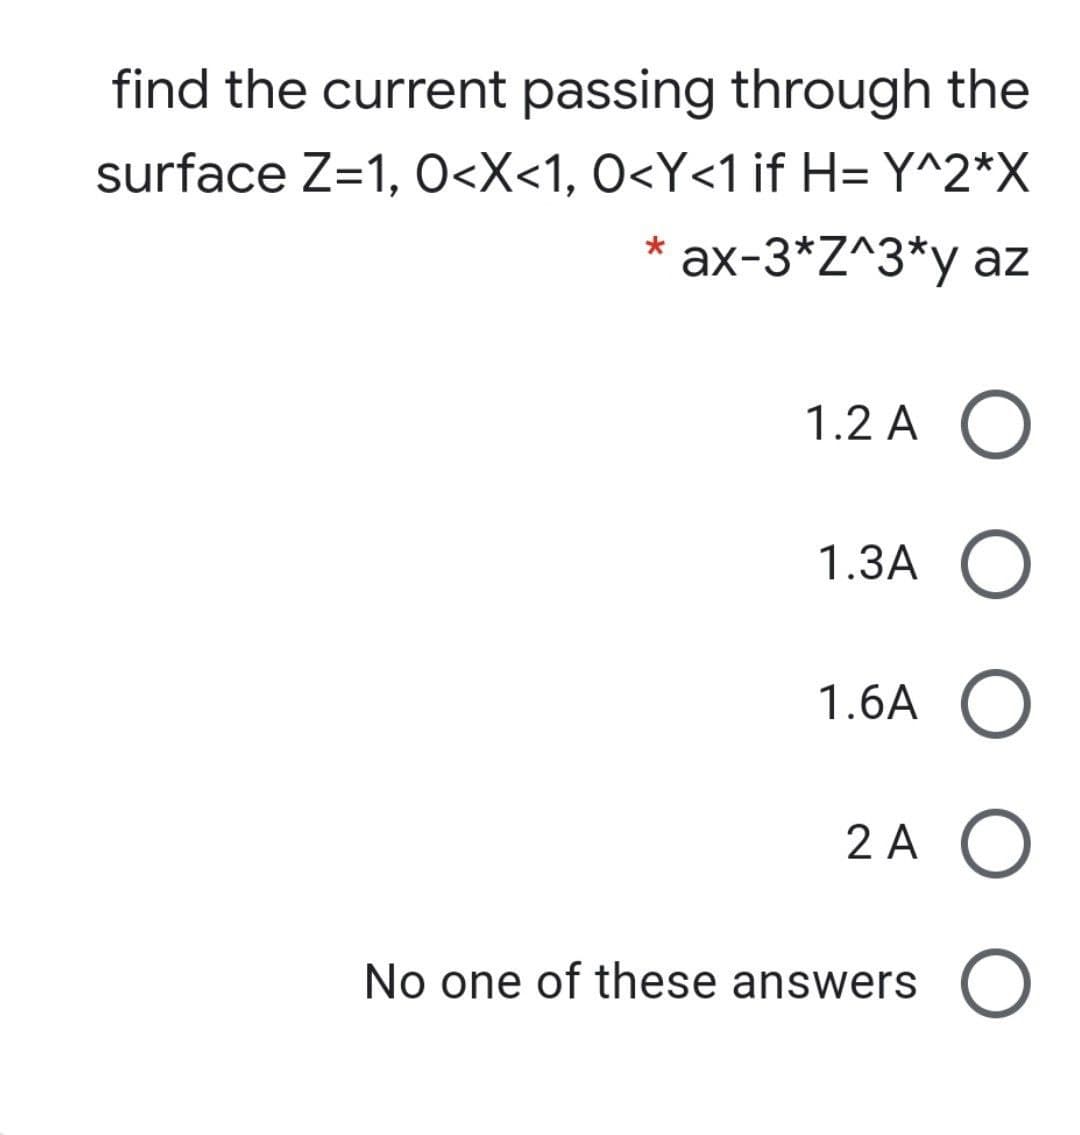 find the current passing through the
surface Z=1, O<X<1, O<Y<1 if H= Y^2*X
ax-3*Z^3*y az
1.2 A O
1.3A O
1.6A O
2 A O
No one of these answers
